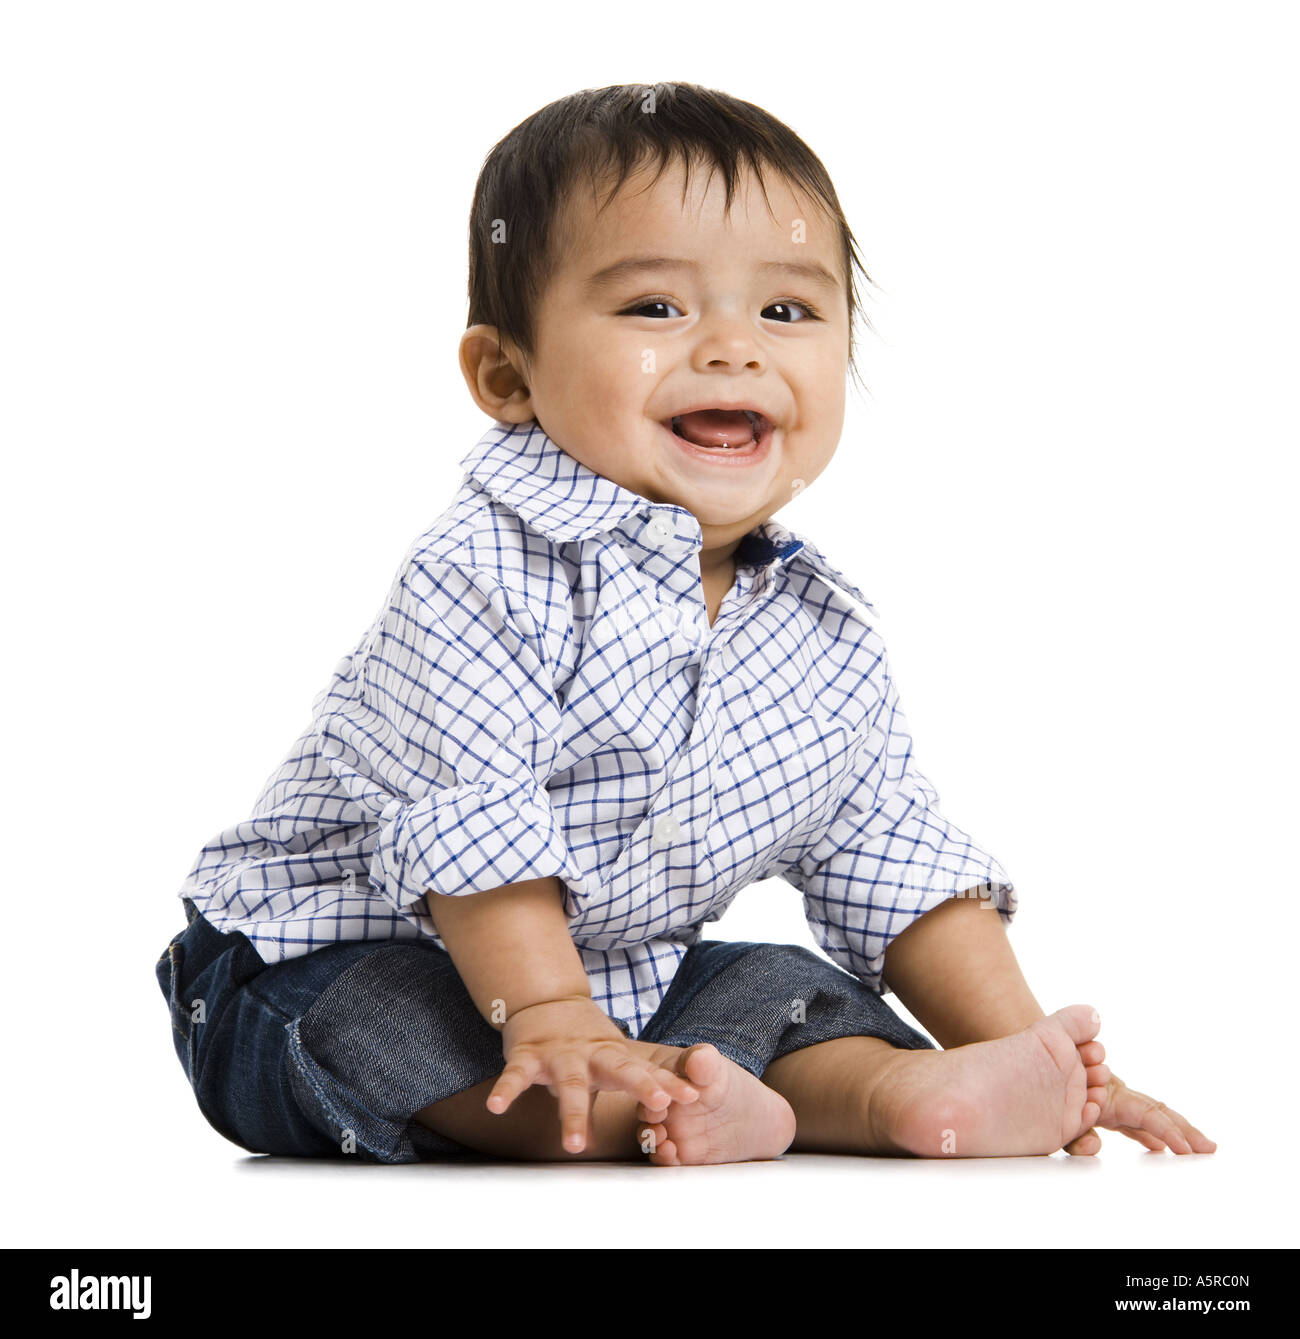 Baby Boy sitting and smiling Stock Photo